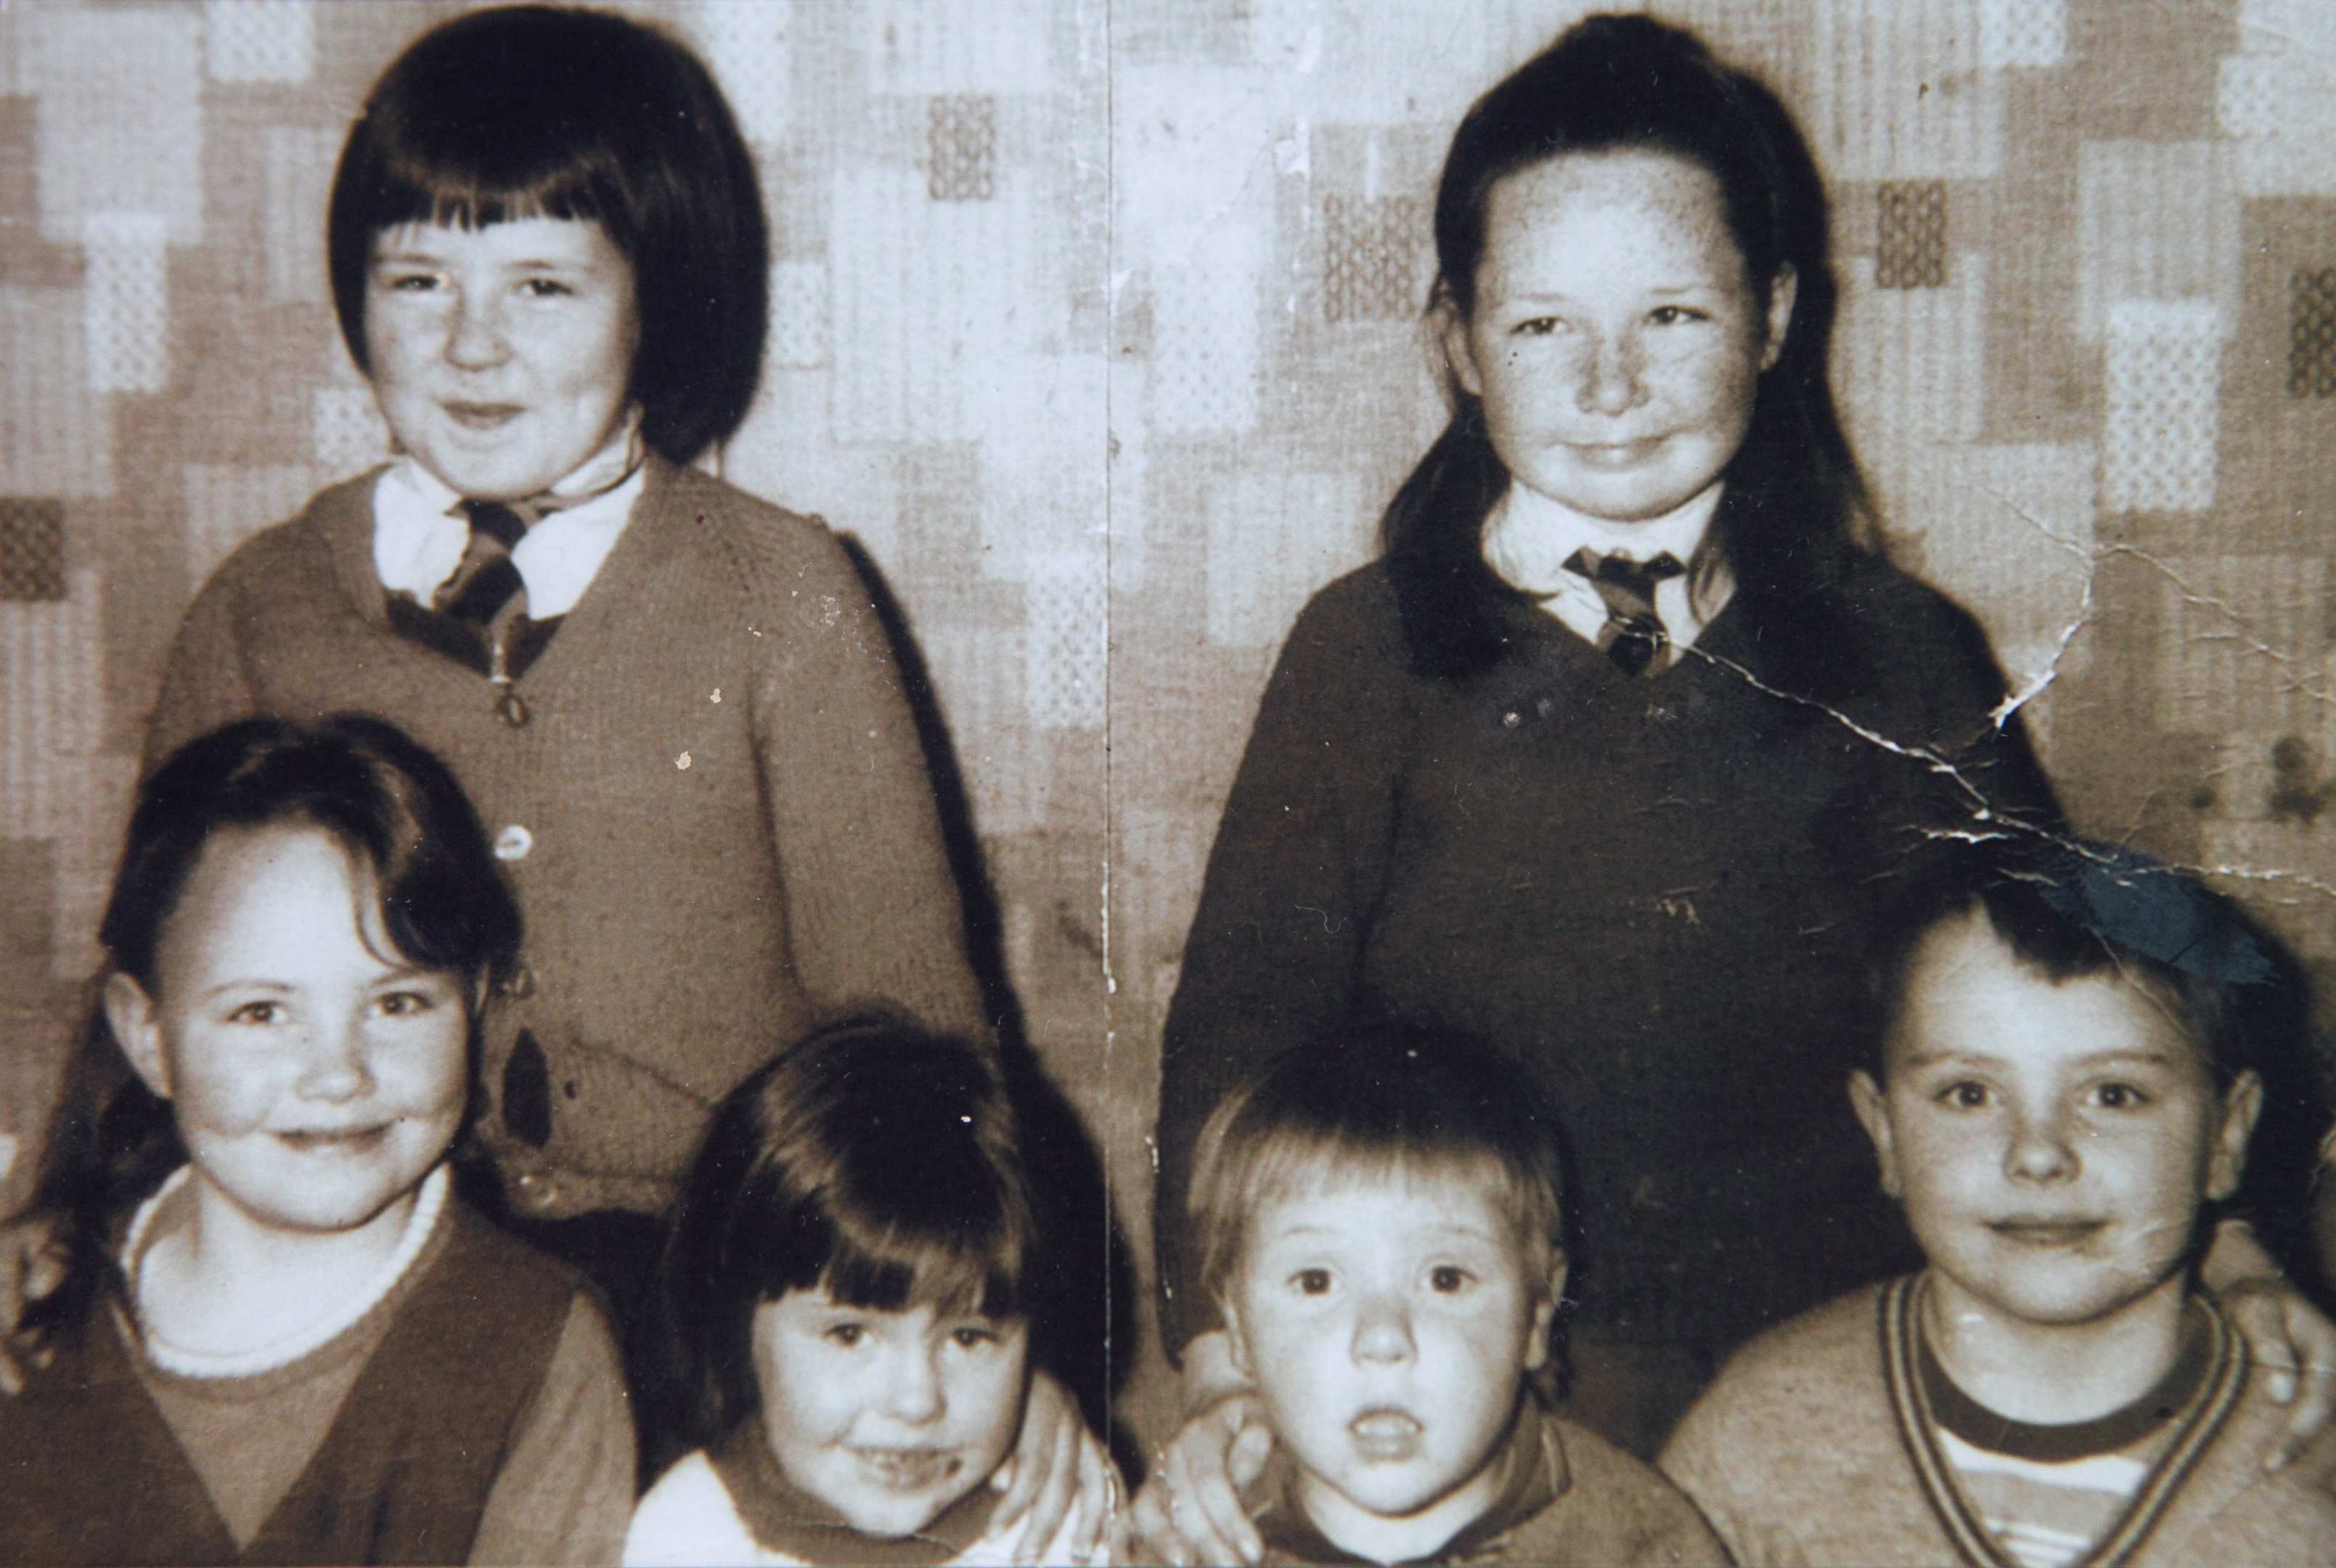 The Stewart/Duncan family:  back row L-R; Marion, Mary, front row L-R; Debbie, Mandy, Ricky (now deceased), Jim.